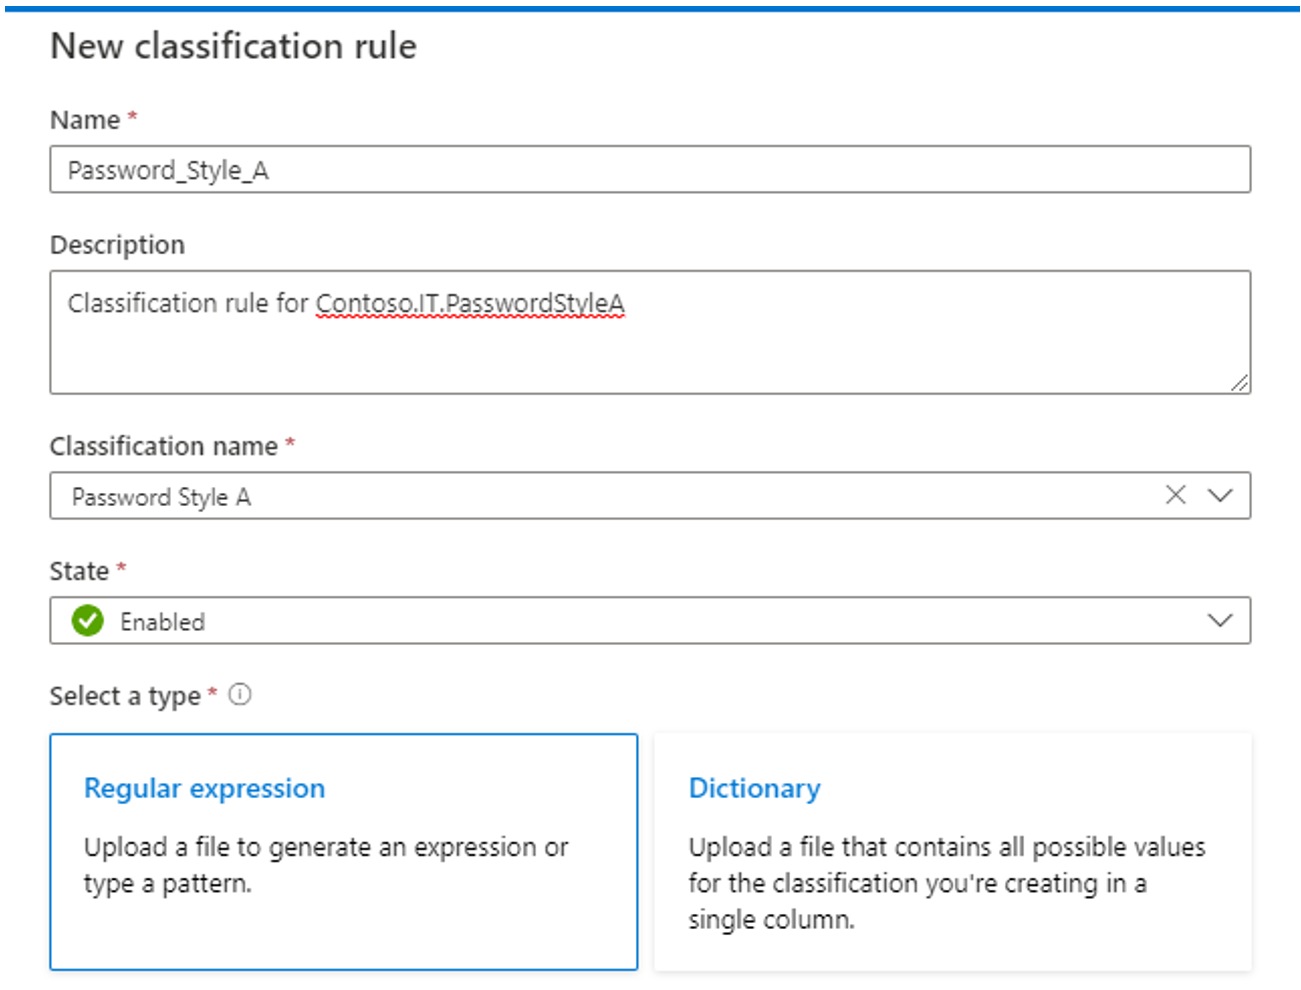 Screenshot that shows the 'Regular expression' and 'Dictionary' options for creating custom classification rules.